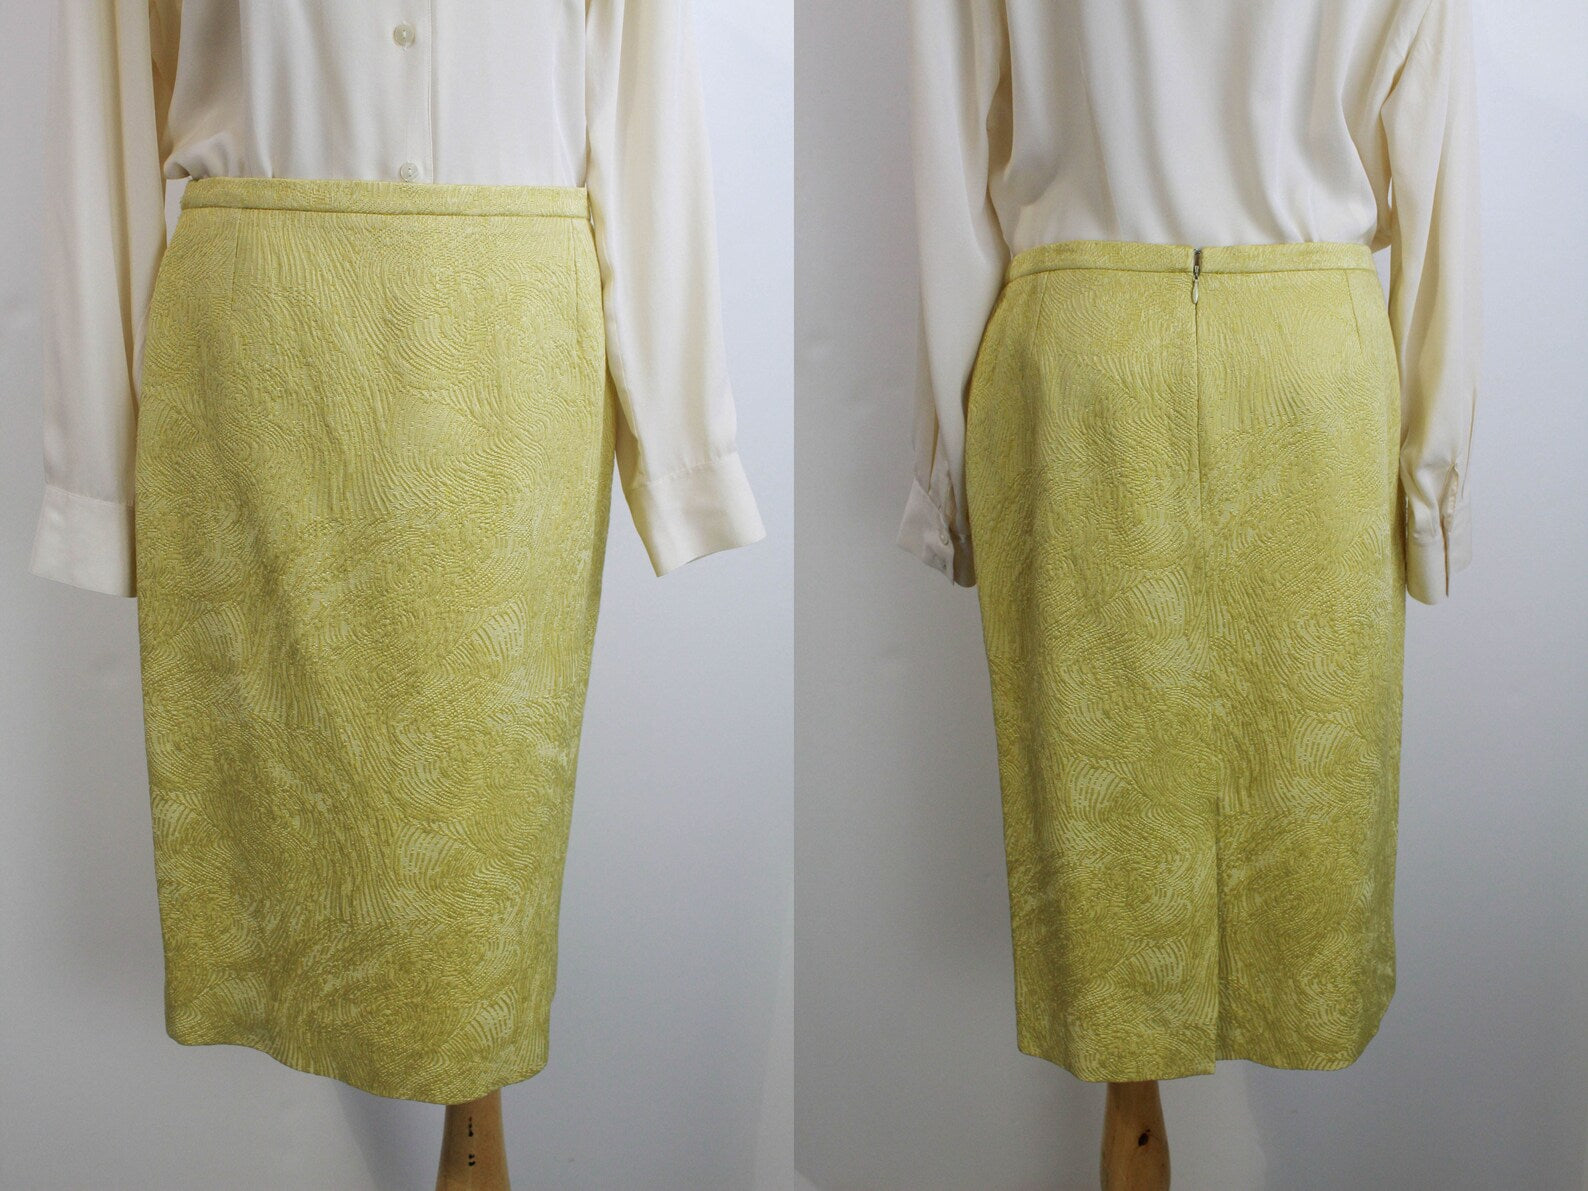 80s Nina Ricci Gold Skirt Suit, Wool and Silk, Vintage Designer Women's Blazer and Skirt, Made in France, M/L